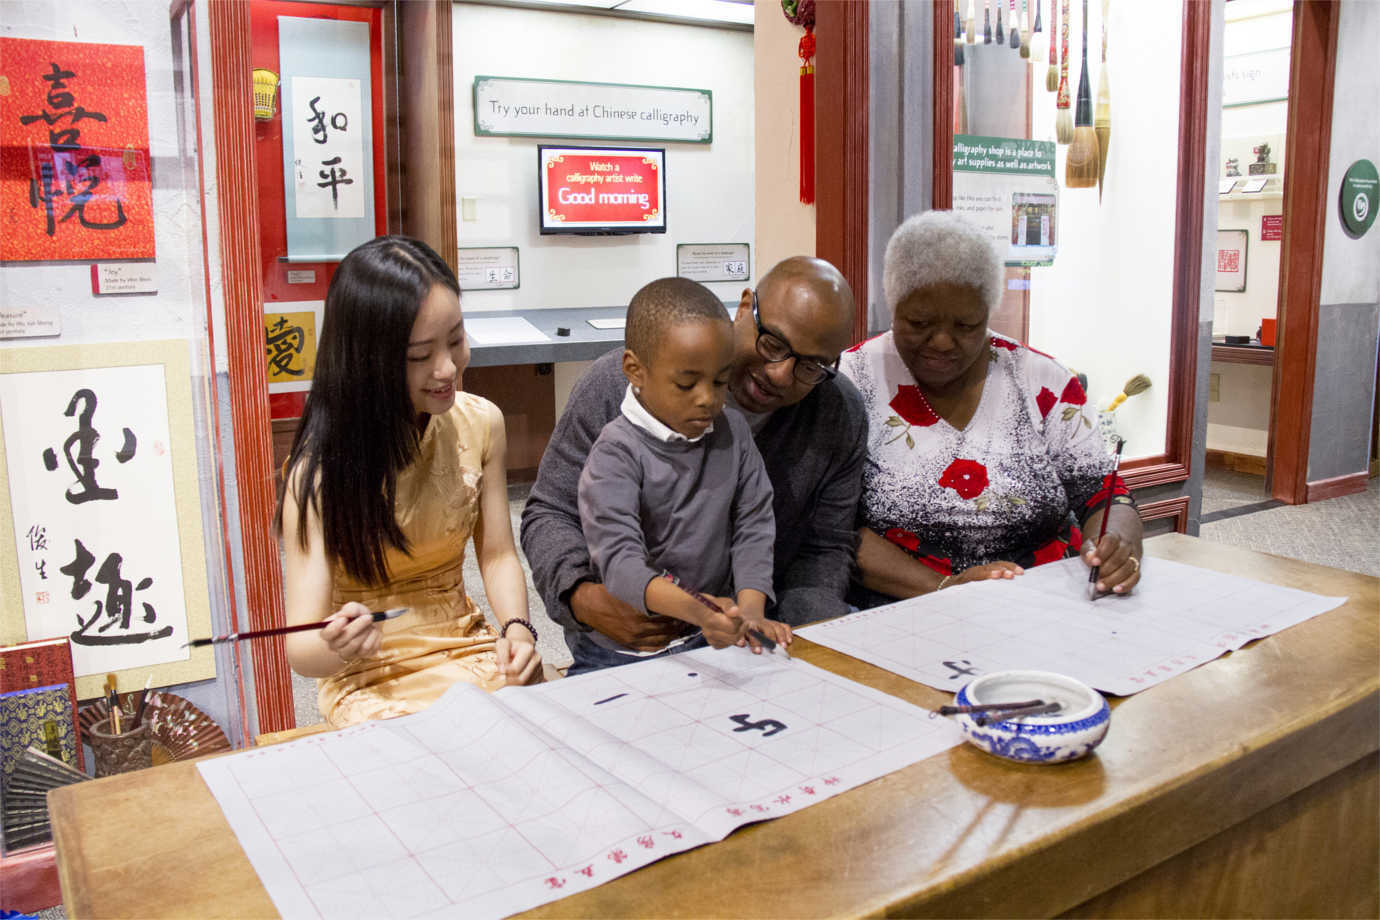 *Take Me There*, which was funded in part through an NEH grant, gives children the opportunity to explore different parts of the world through immersive experiences. In an exhibition focused on China, a child practices calligraphy. Image courtesy of the Children's Museum of Indianapolis.